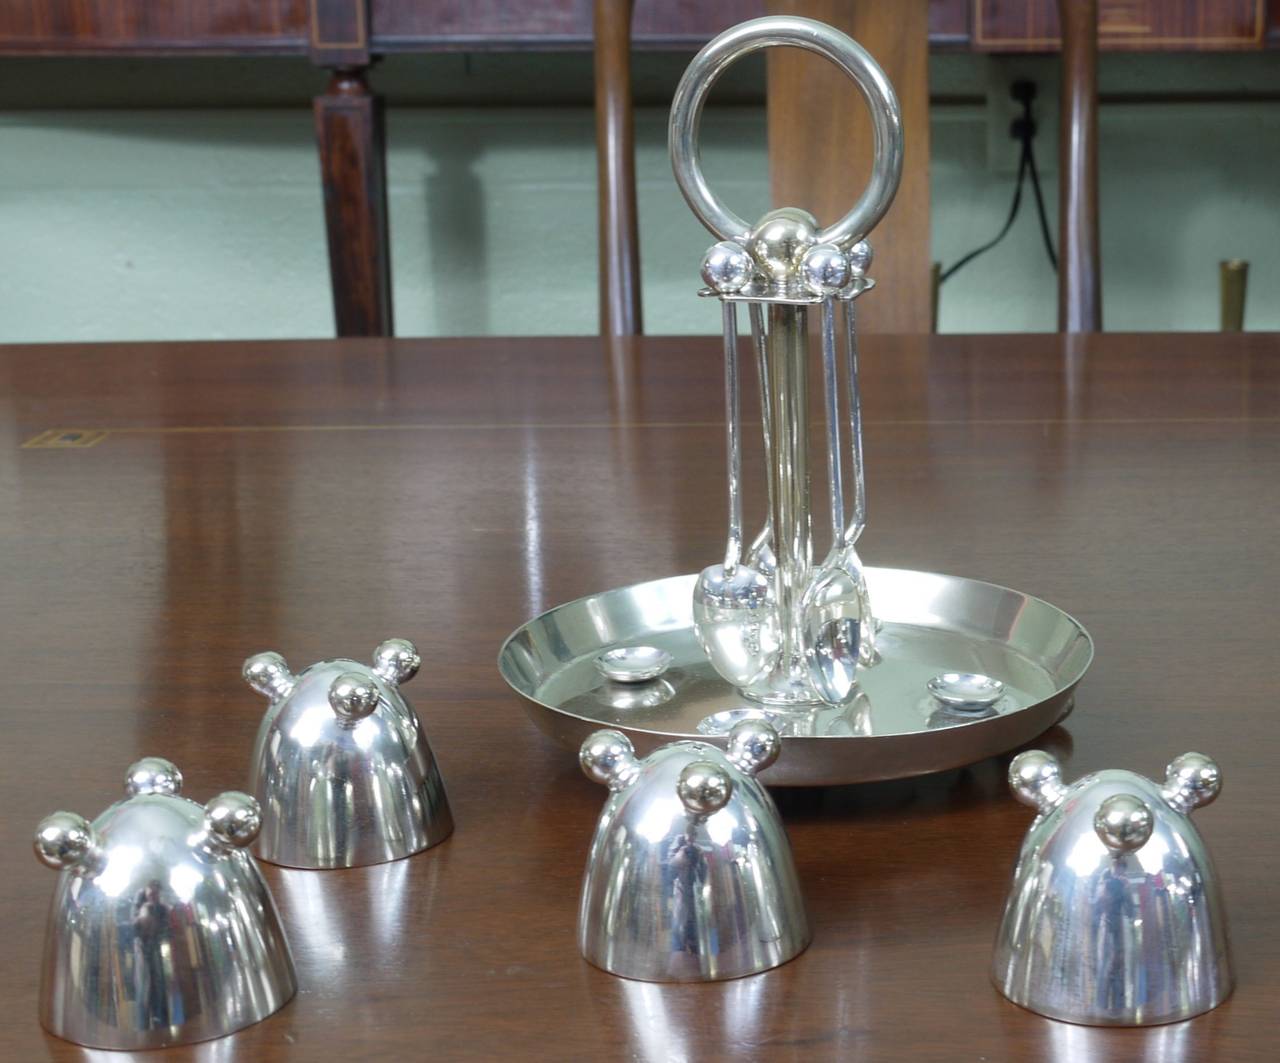 Luxurious silver plate soft boiled egg serving set in the manner of Christopher Dresser and the cups are similar in design to egg cups by Fritz August Breuhaus de Groot.